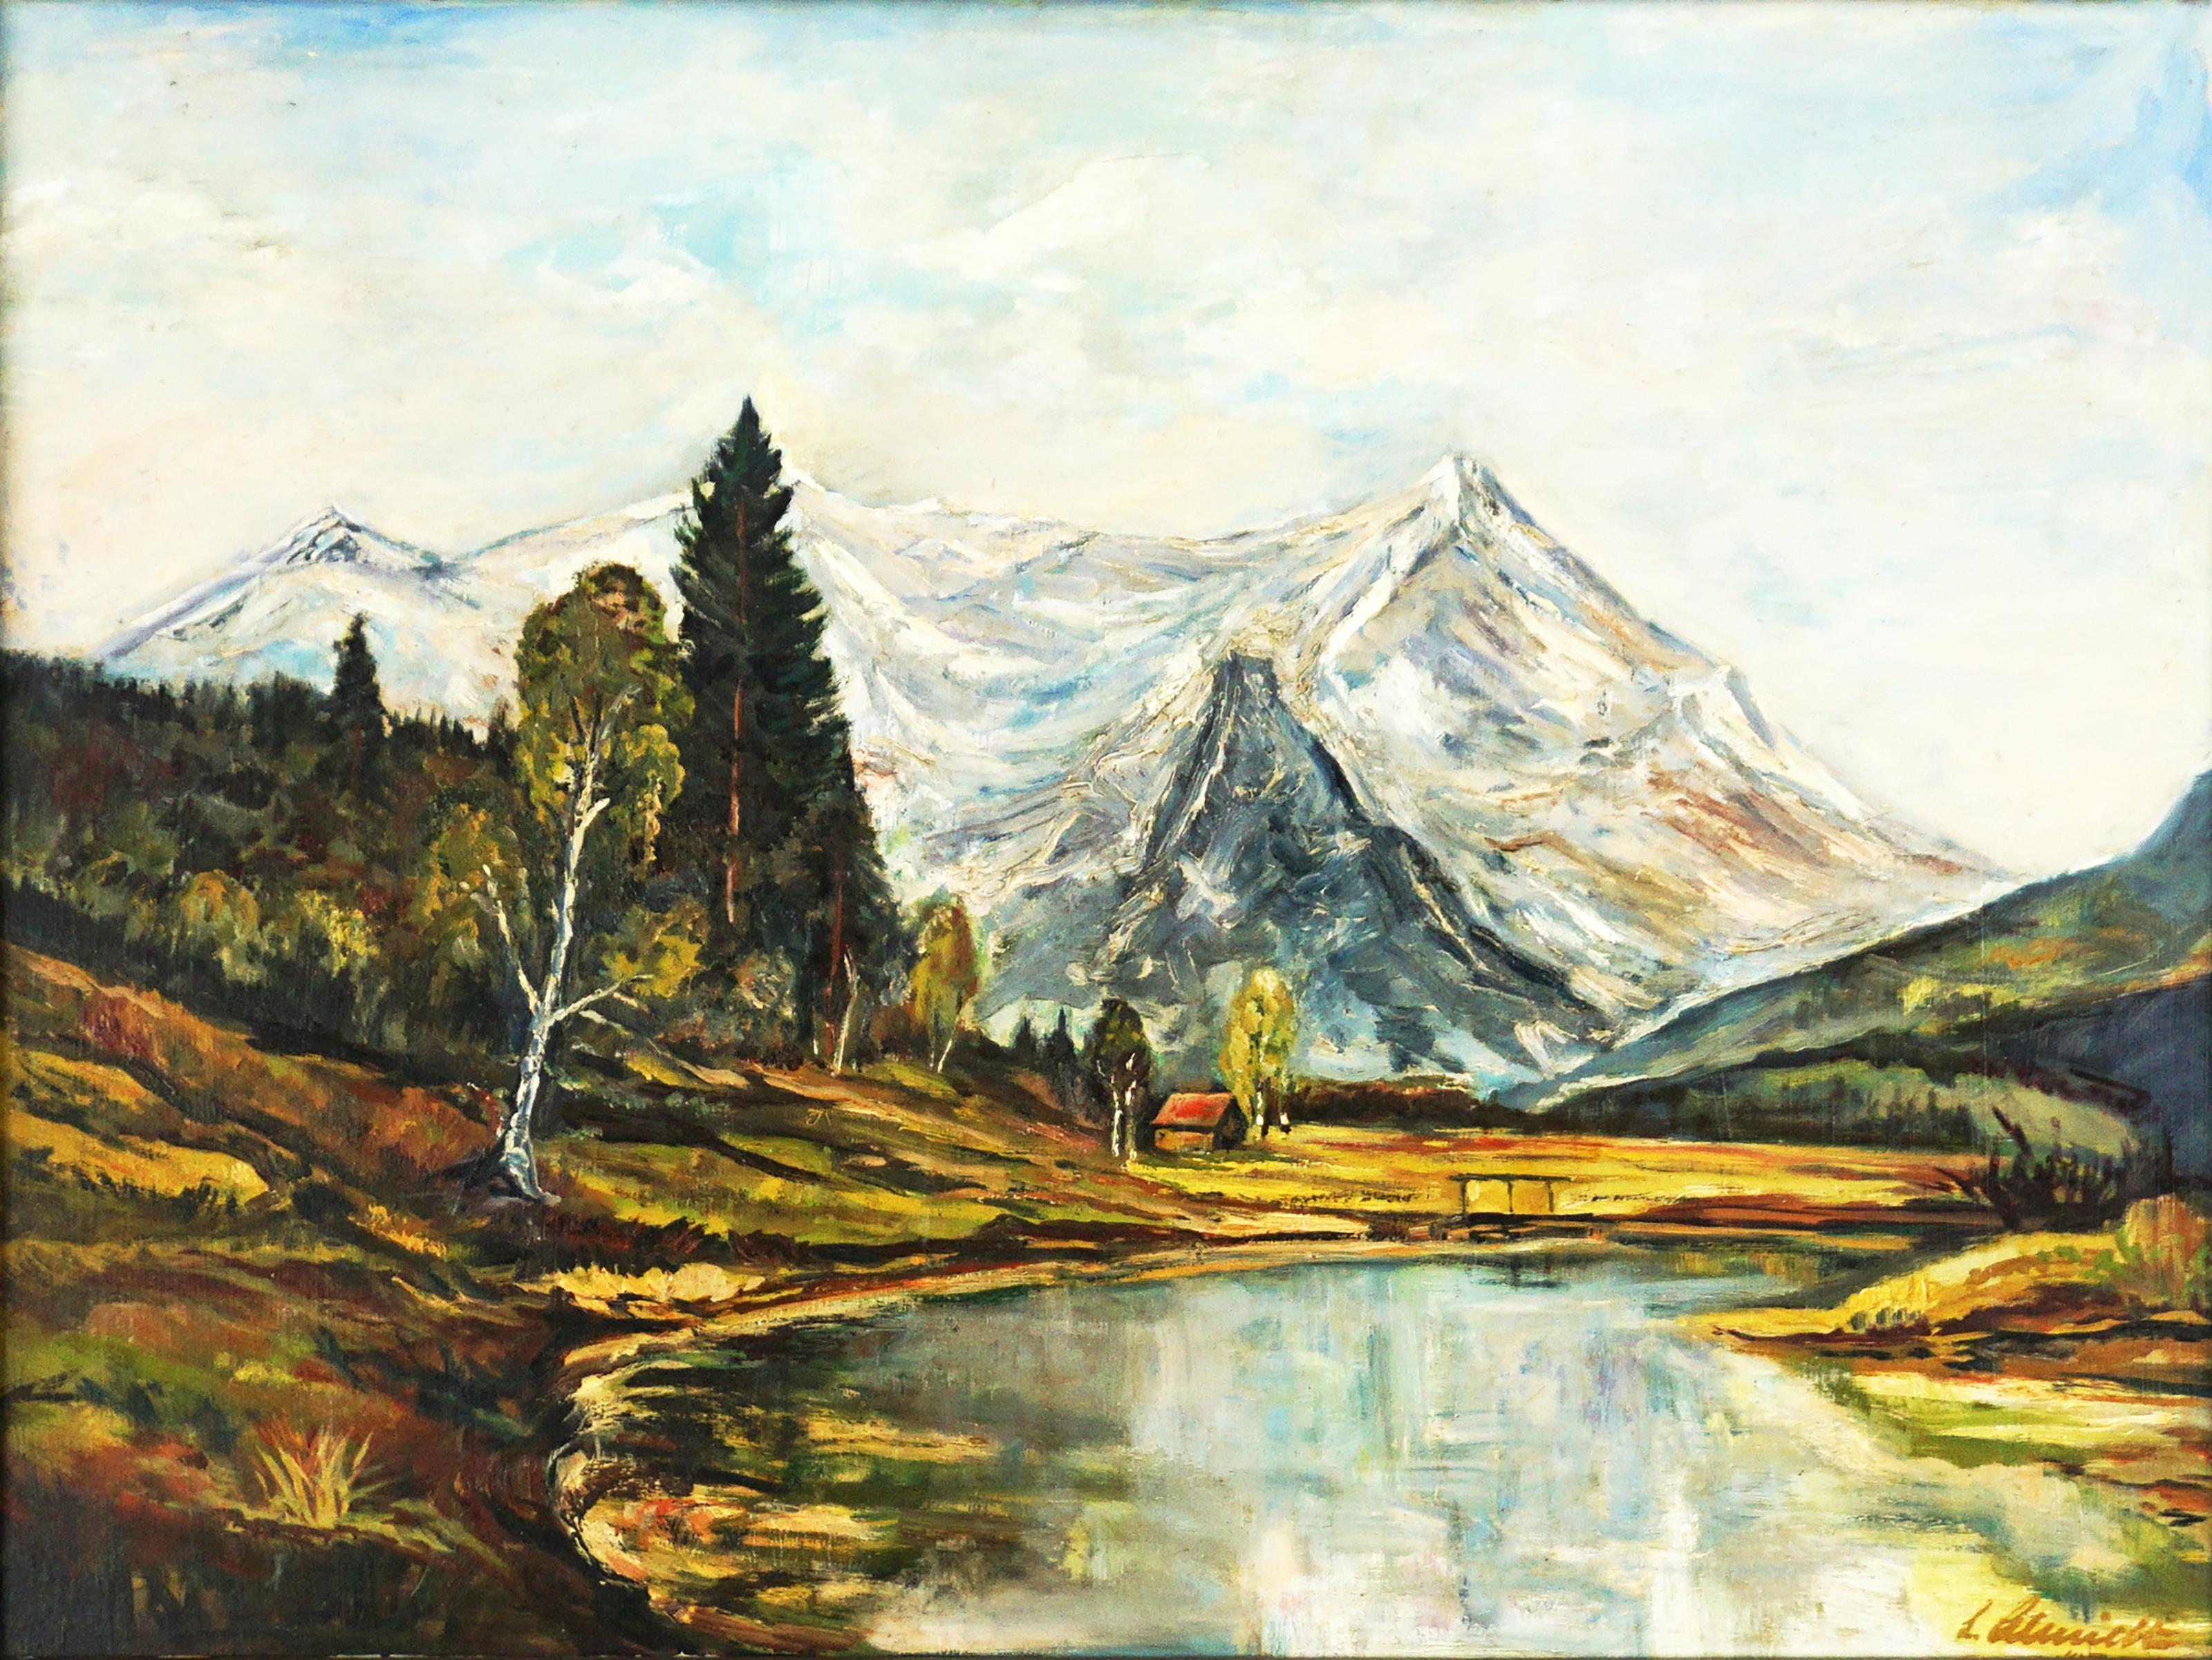 Vintage Bavarian Lake Landscape in European Style - Painting by Unknown